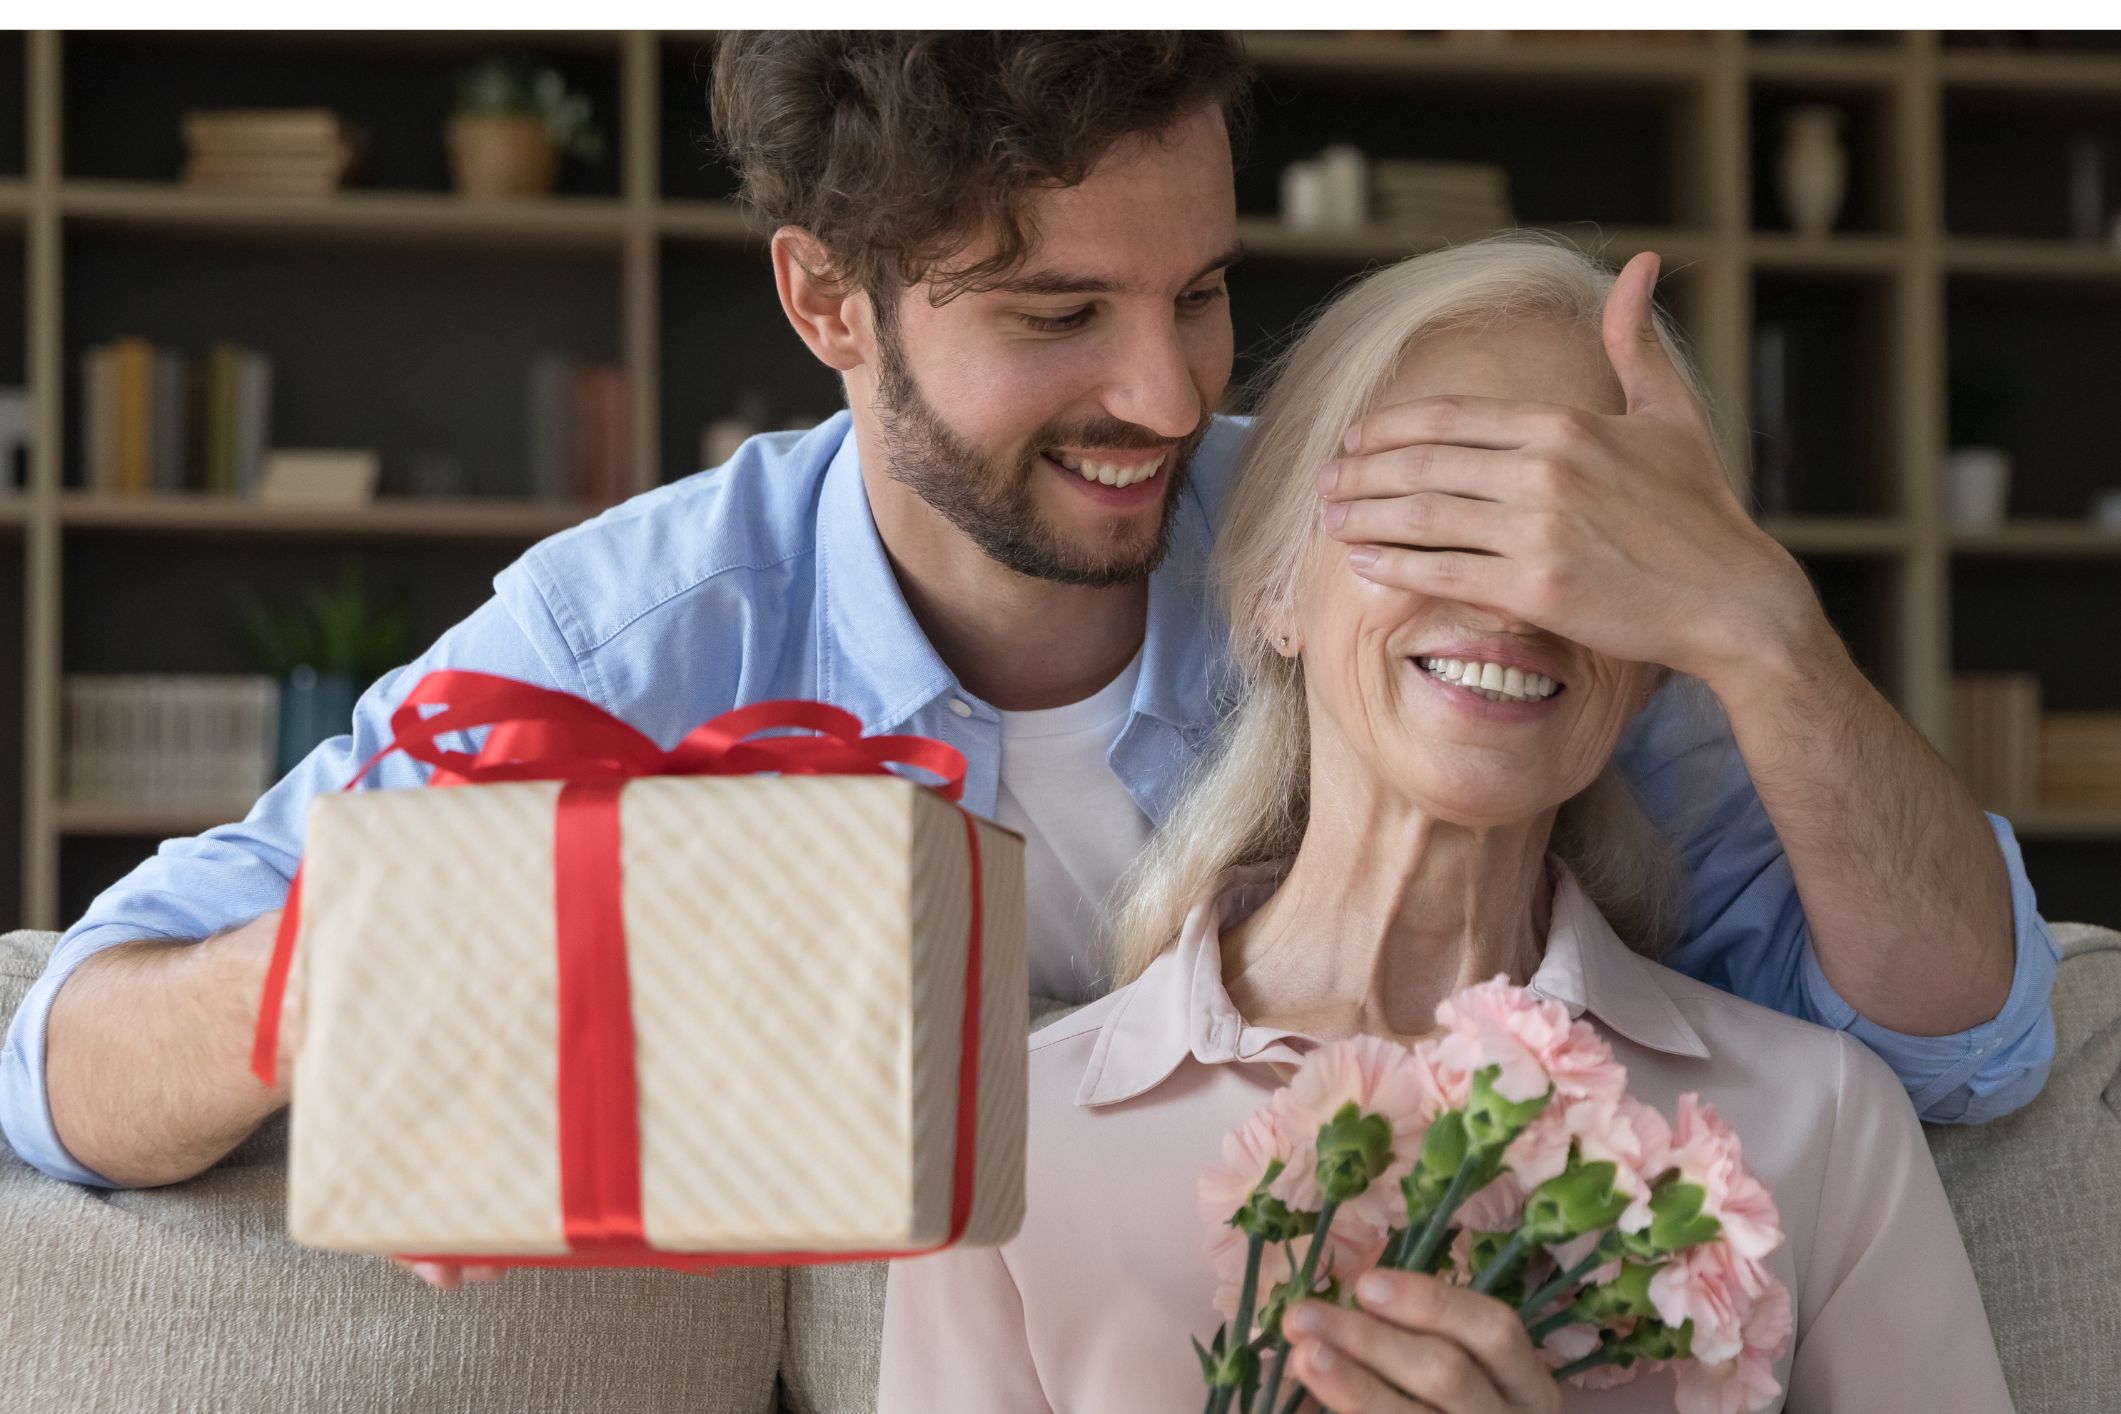 Top 10 Most Thoughtful Mother's Day Gifts for Aged Care Workers